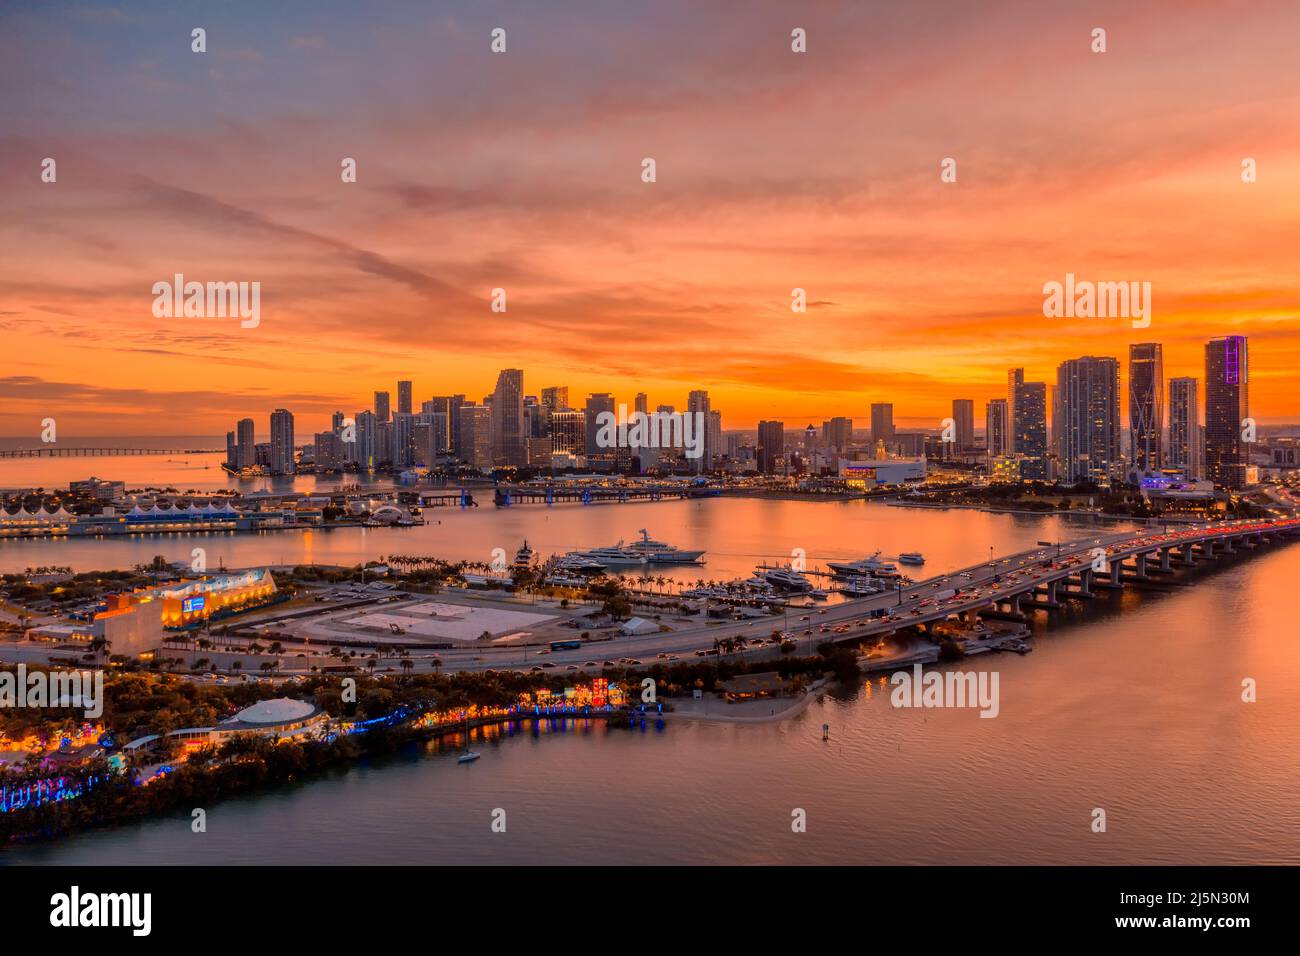 Amazing sunset over Downtown Miami in Florida Stock Photo